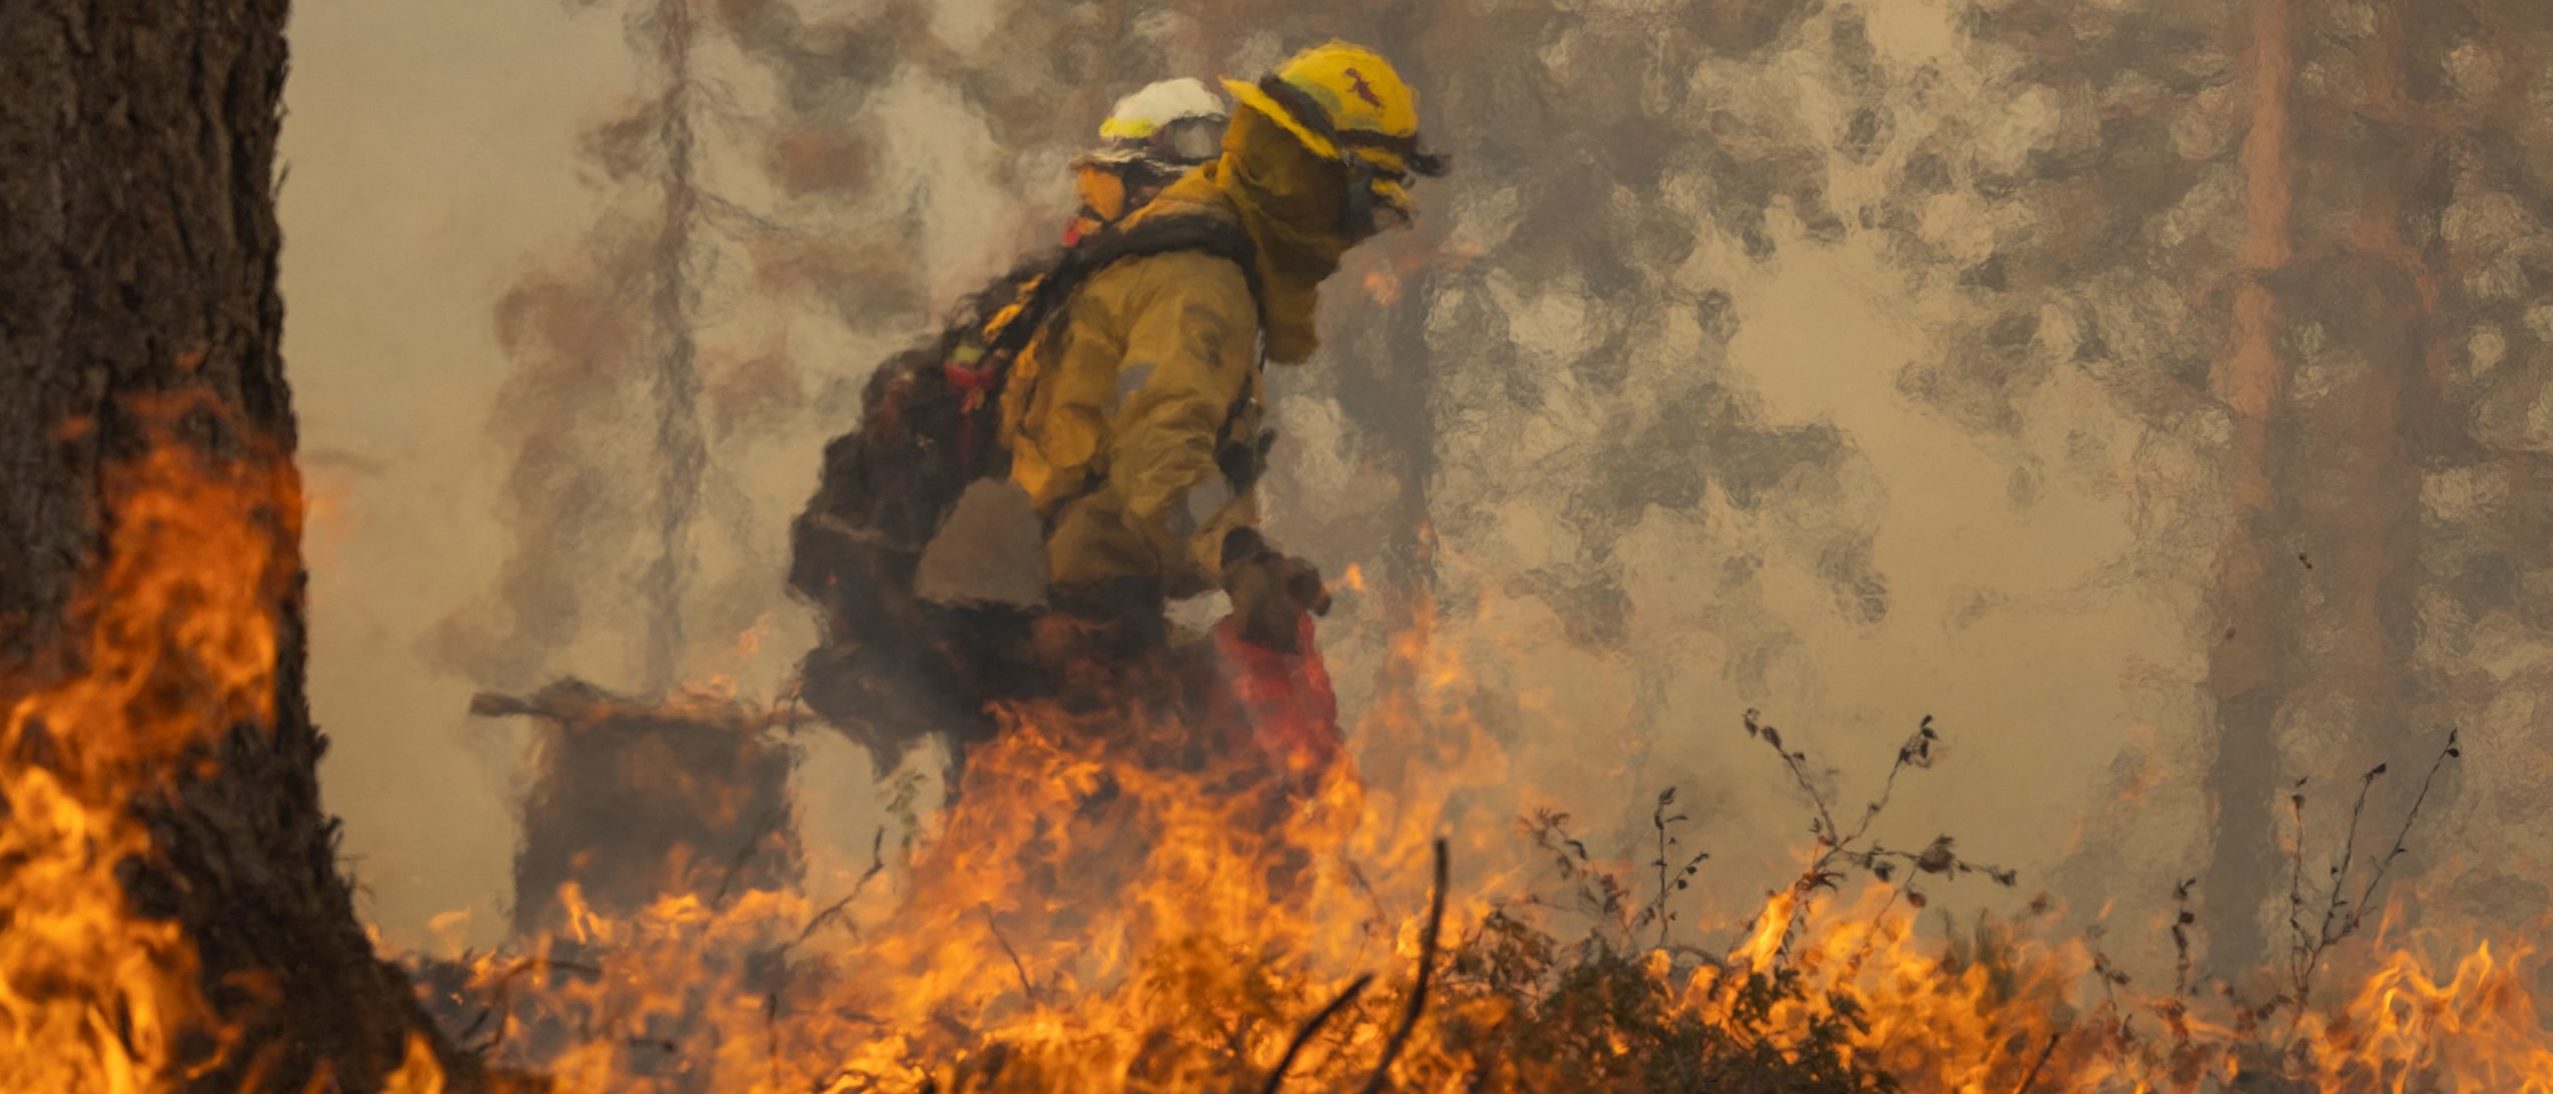 TOPSHOT - A firefighter lights a backfire while fighting the Oak Fire on near Mariposa, California, on July 24, 2022. - The fierce California wildfire expanded early Sunday burning several thousand acres and forcing evacuations, as tens of millions of Americans sweltered through scorching heat with already record-setting temperatures due to climb even further. More than 2,000 firefighters backed by 17 helicopters have been deployed against the Oak Fire, which broke out Friday near Yosemite National Park, the California Department of Forestry and Fire Protection (CAL FIRE) said in a report. (Photo by DAVID MCNEW / AFP) (Photo by DAVID MCNEW/AFP via Getty Images)